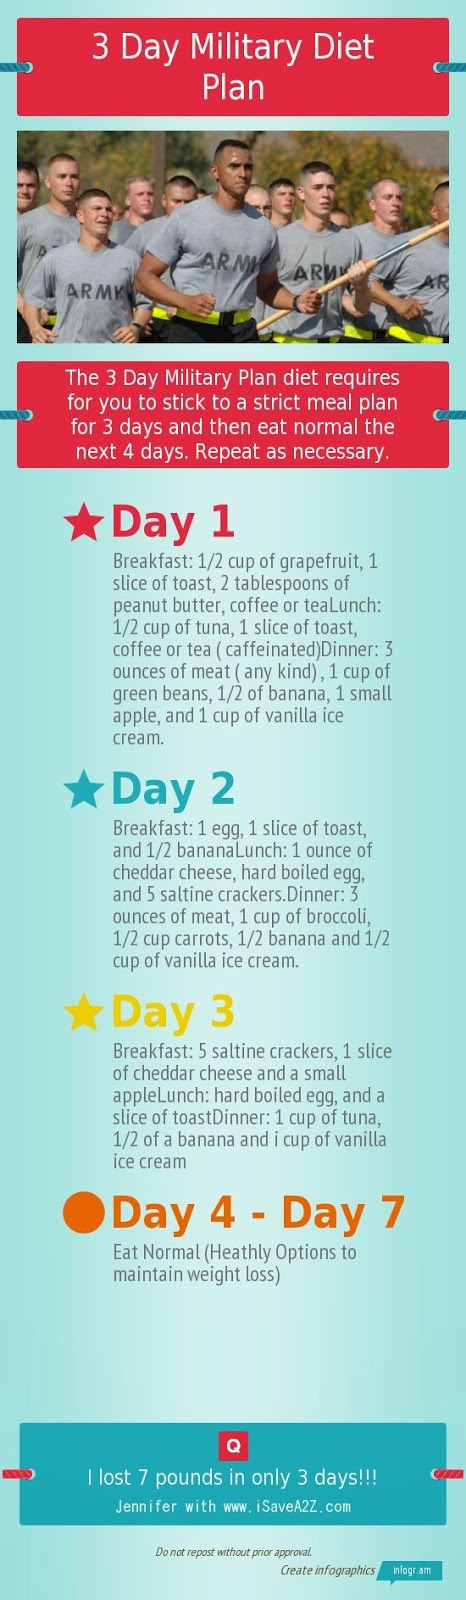 hover_share weight loss - 3 day military diet plan